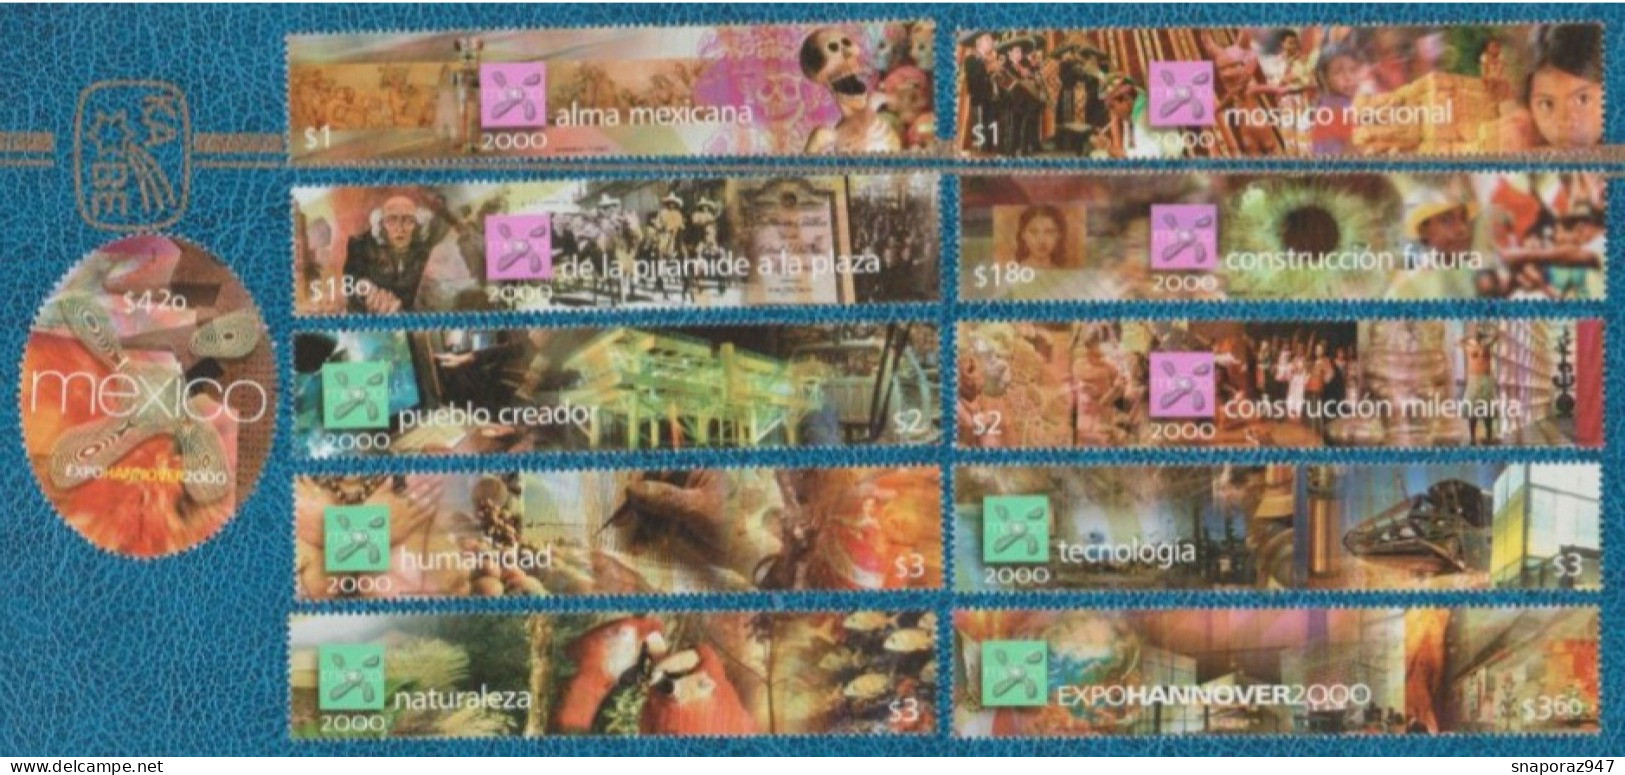 2000 Messico "Expo 2000" Universal Exhibition In Hanover (Block Printed) Set MNH** RX77 - 2000 – Hannover (Germania)